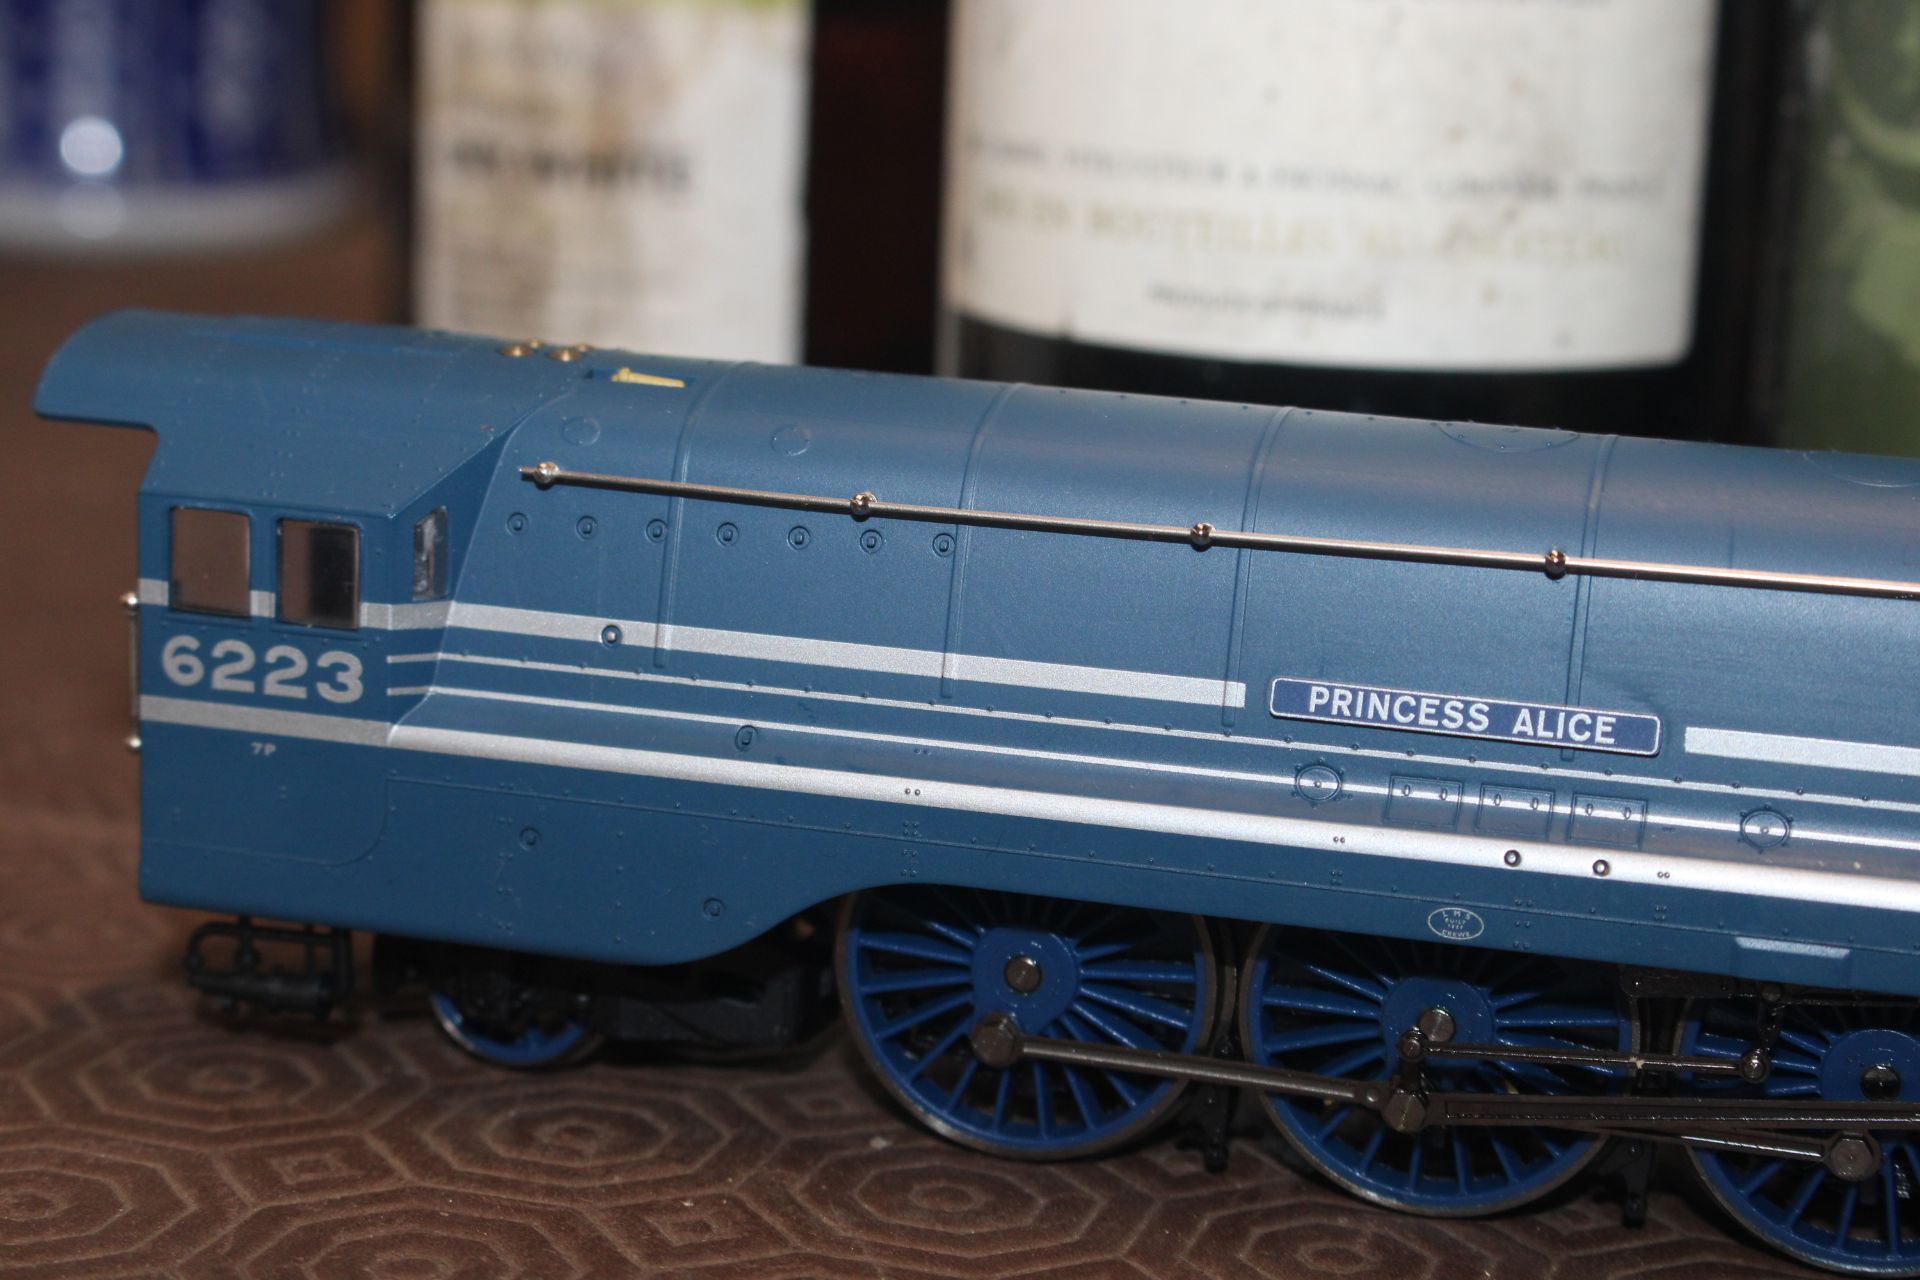 Two Hornby GNER 3306 locomotives; and carriages; and a LMS 6223 locomotive "Princess Alice" and - Image 23 of 34